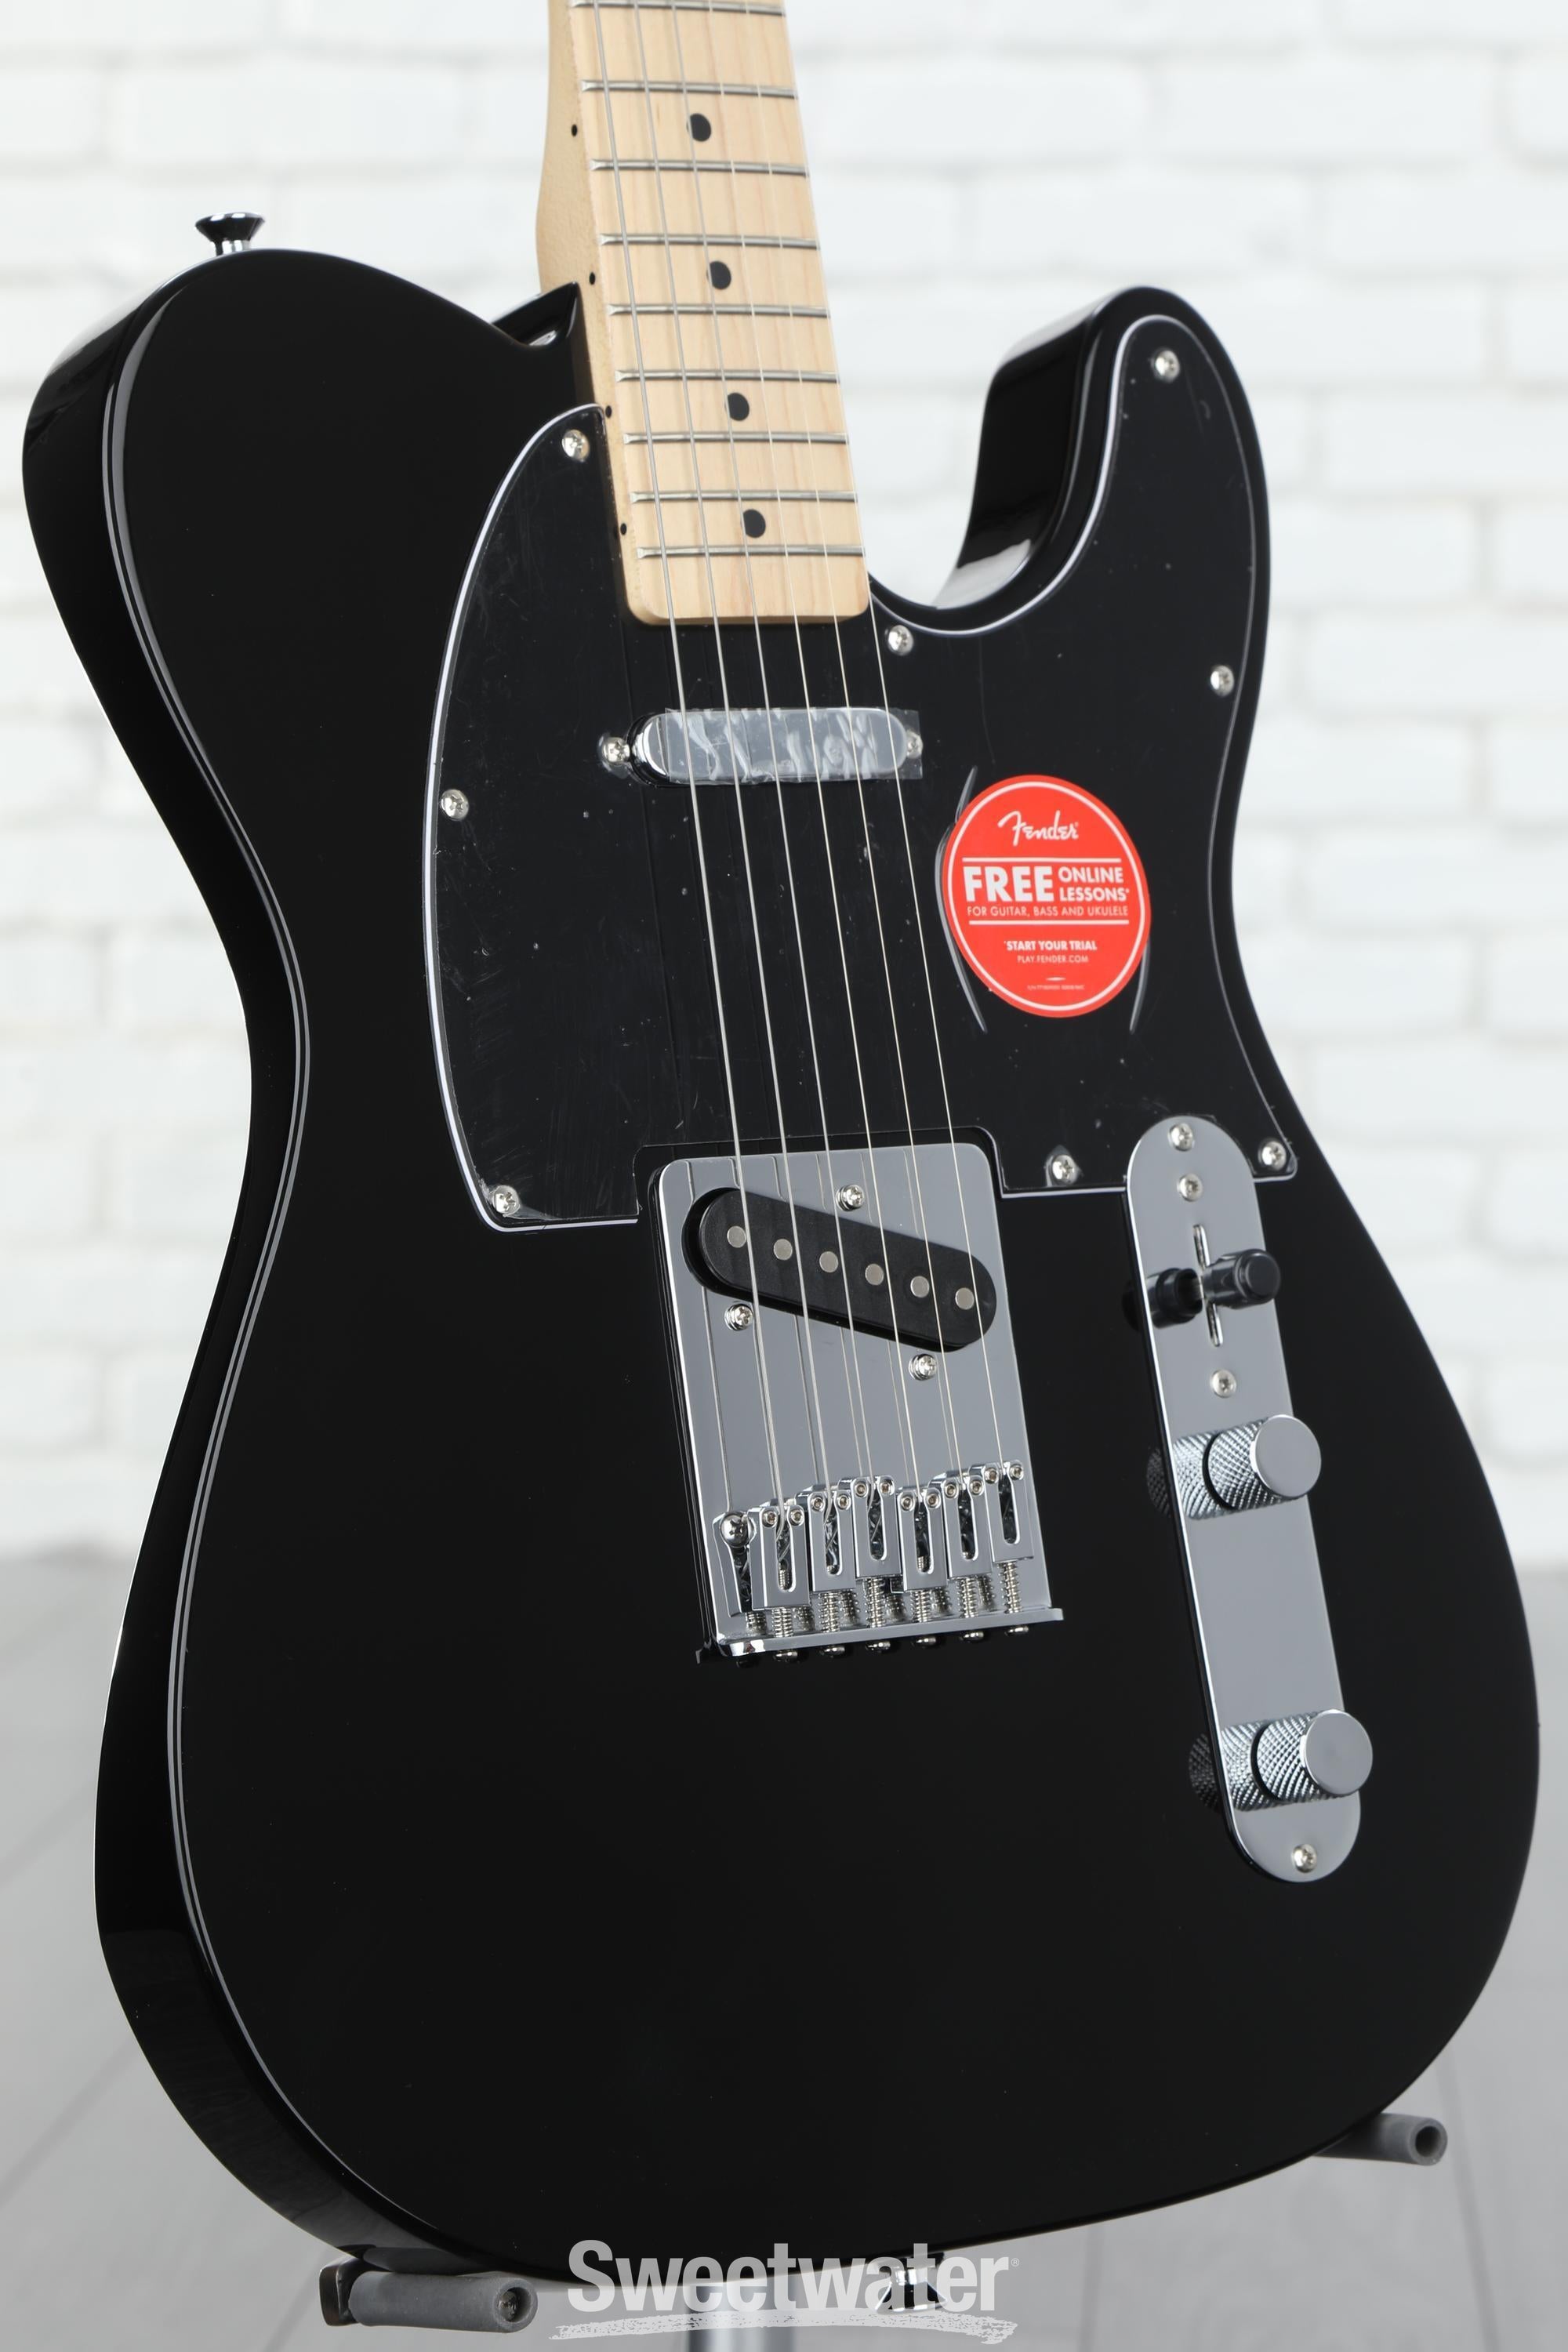 Squier Affinity Series Telecaster Electric Guitar - Black, Sweetwater  Exclusive